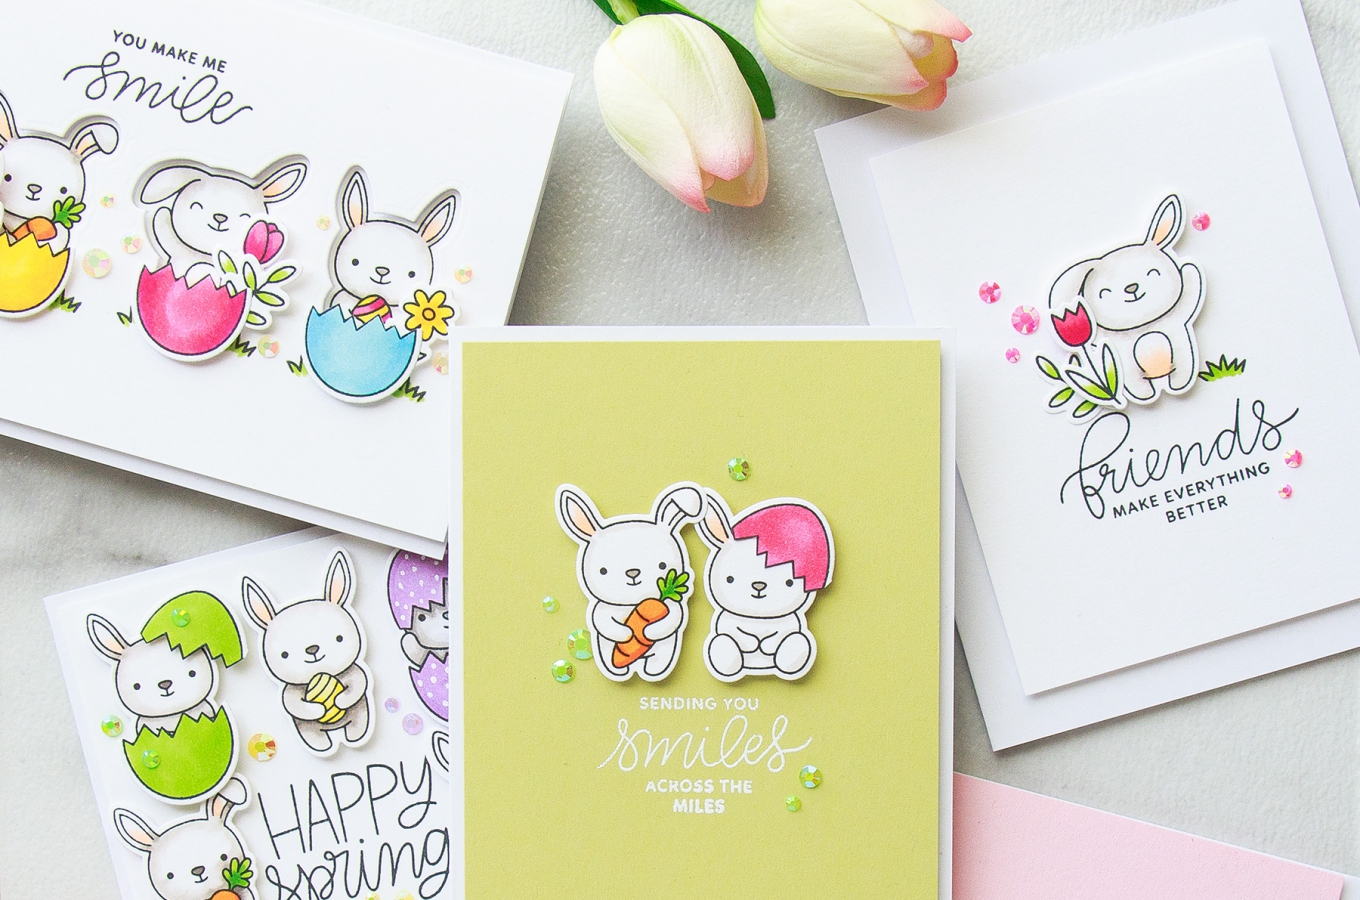 Welcome to Joyful 1pcs Rabbit Bicycle Easter Clear Stamp for Card Making Decoration and Scrapbooking 12x20cm 